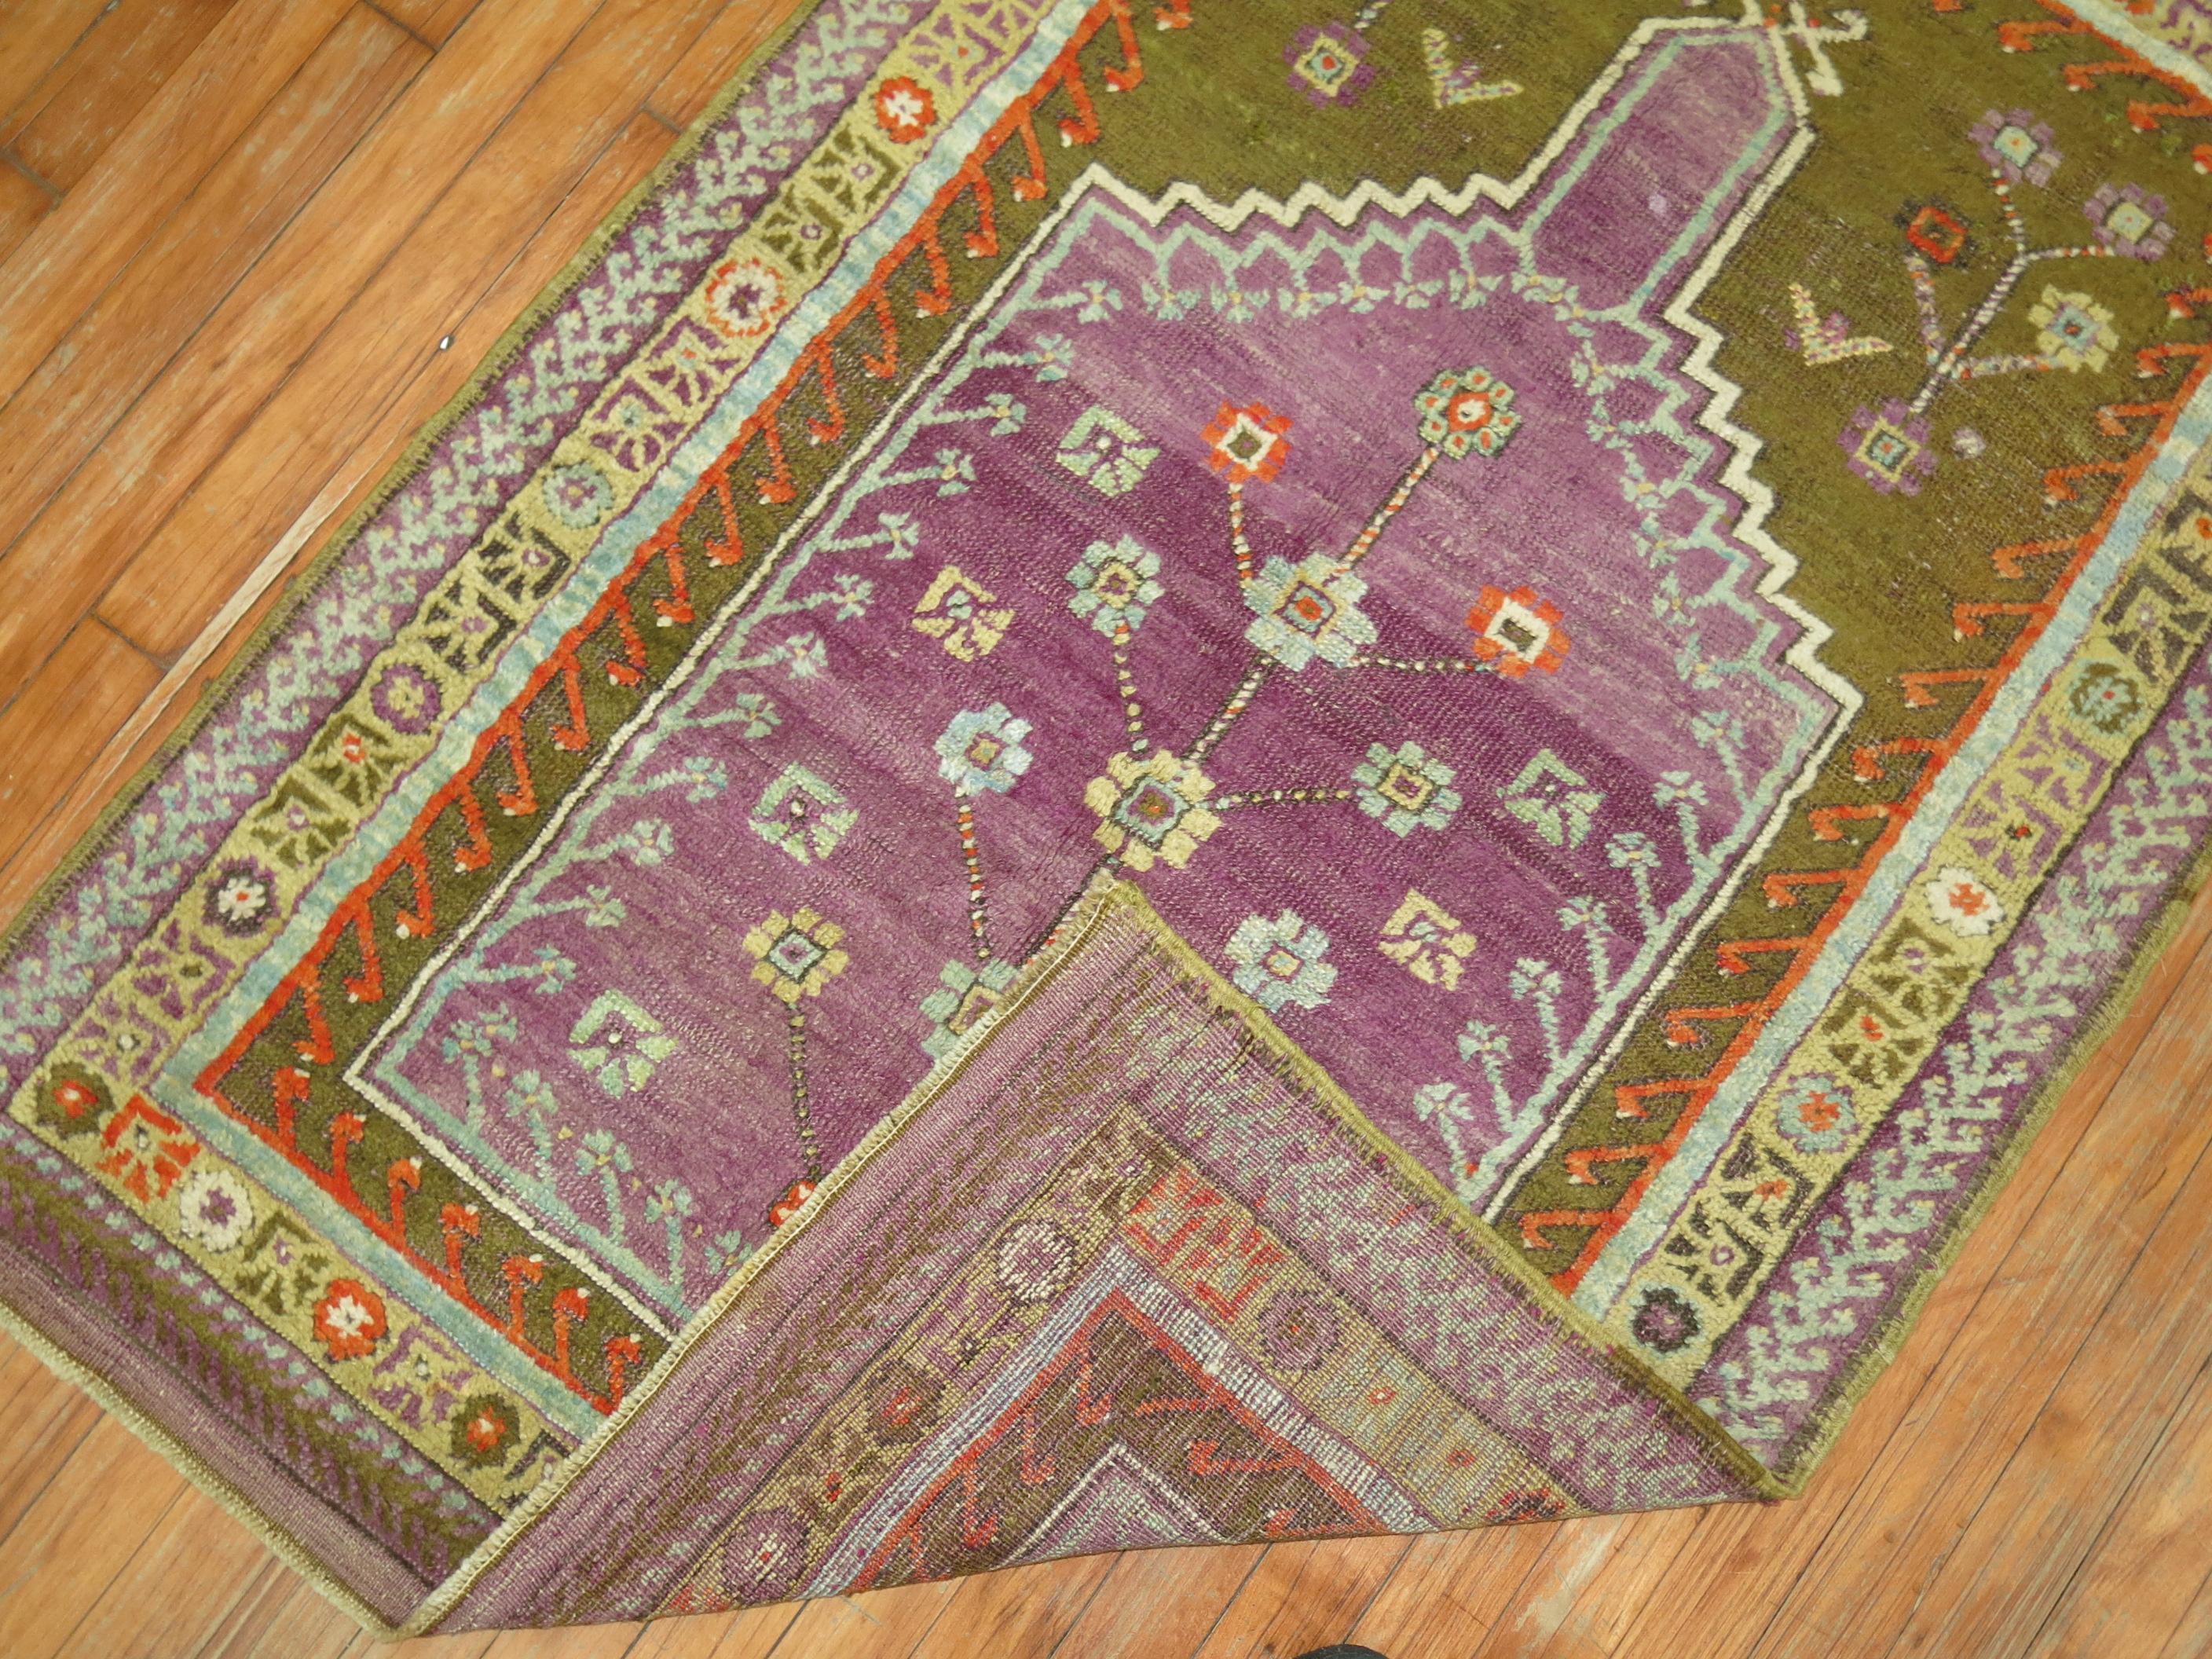 A one of a kind decorative Turkish Ghiordes rug with a prayer niche motif featuring an unusual purple color.